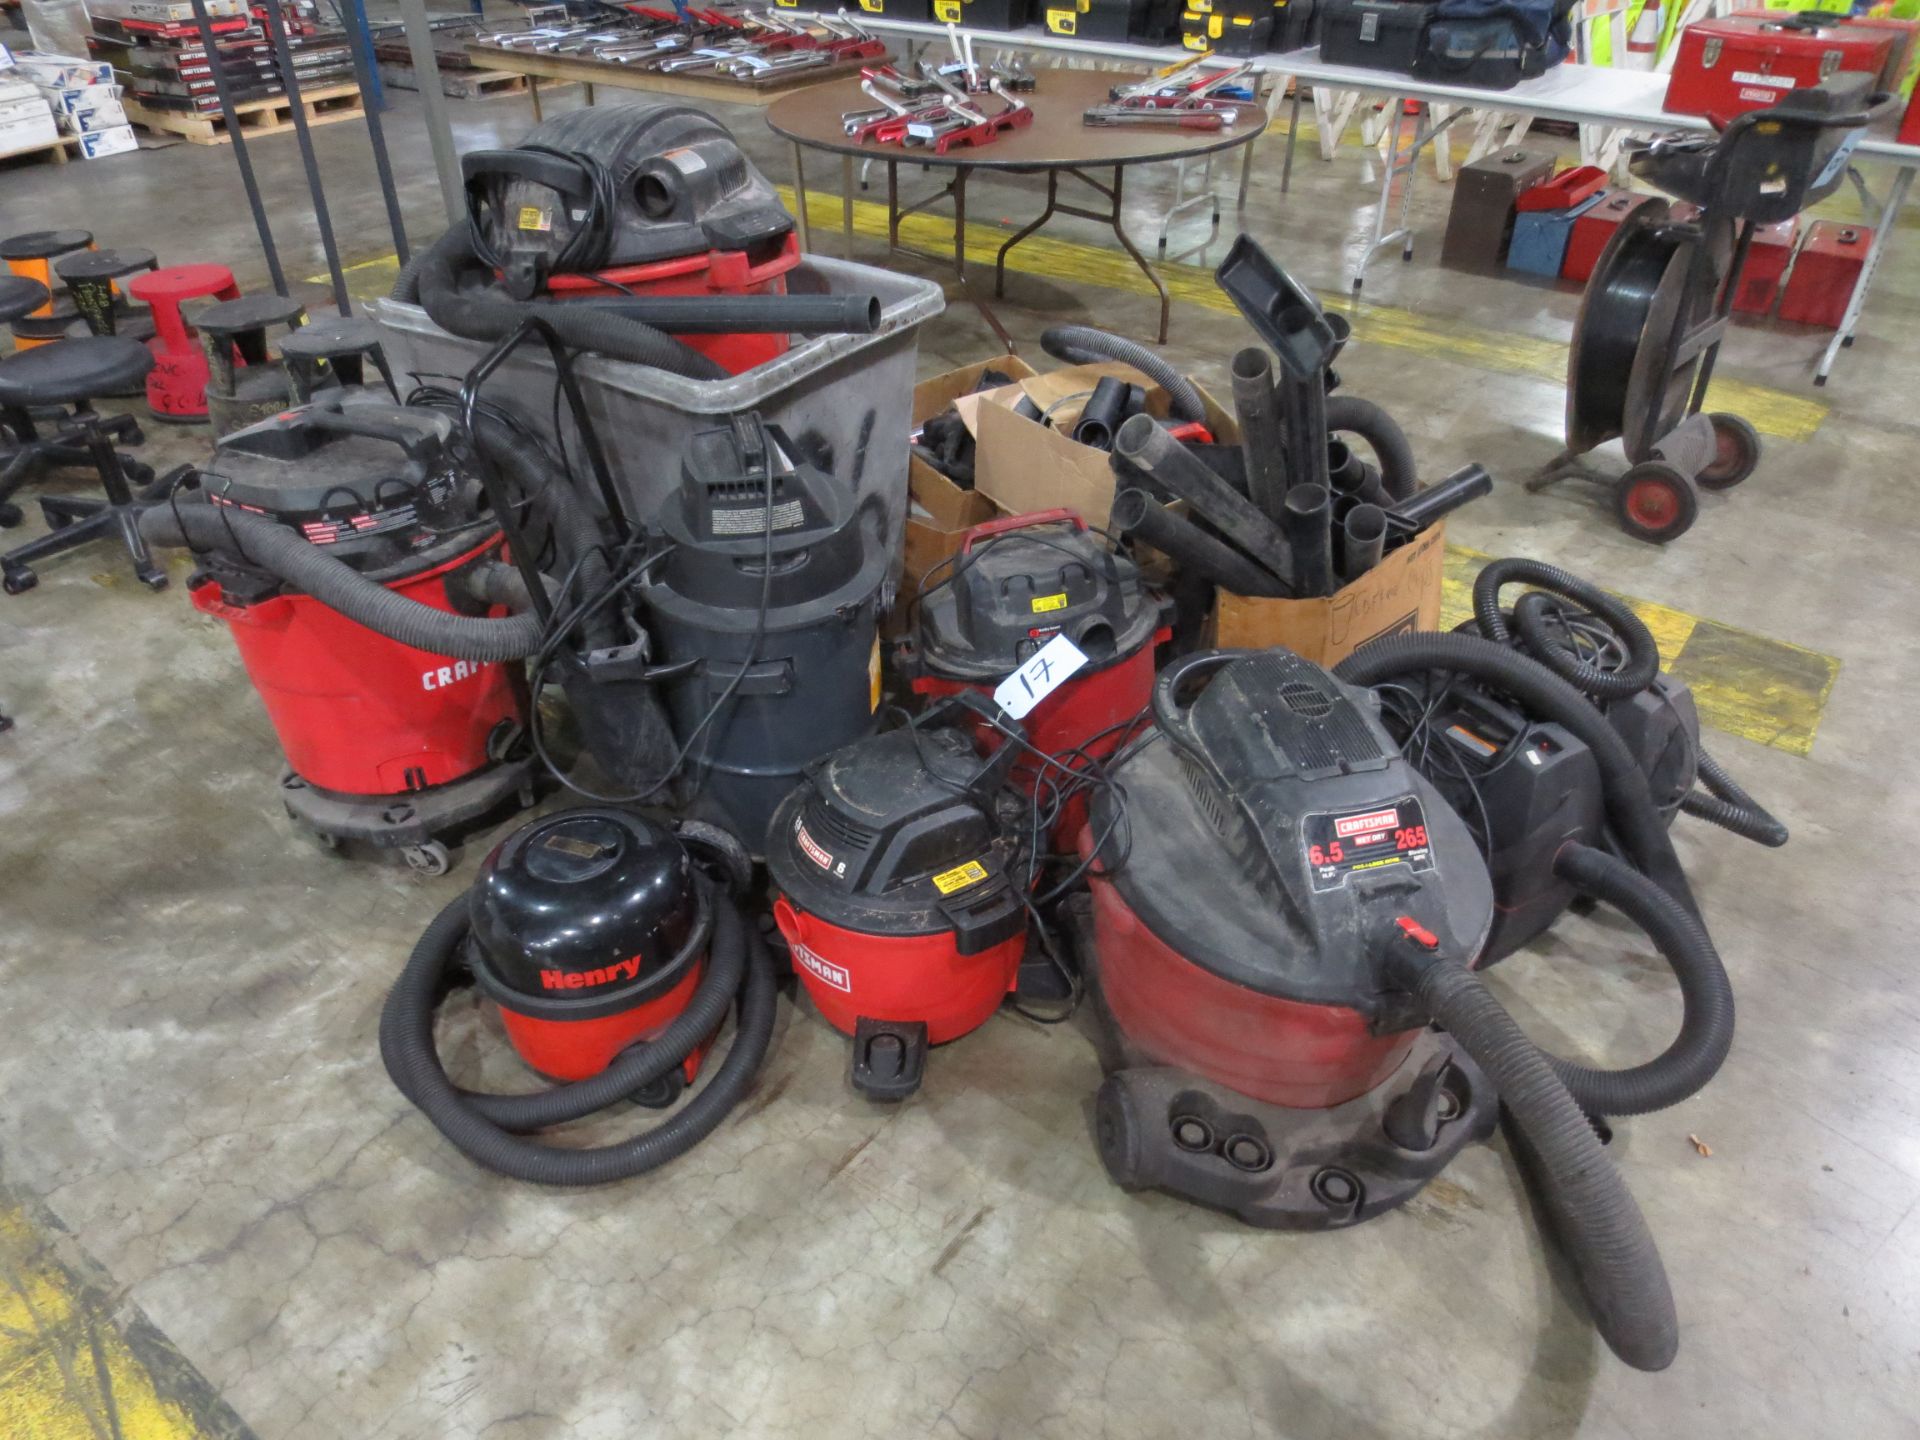 Shop Vacuums and Accessories